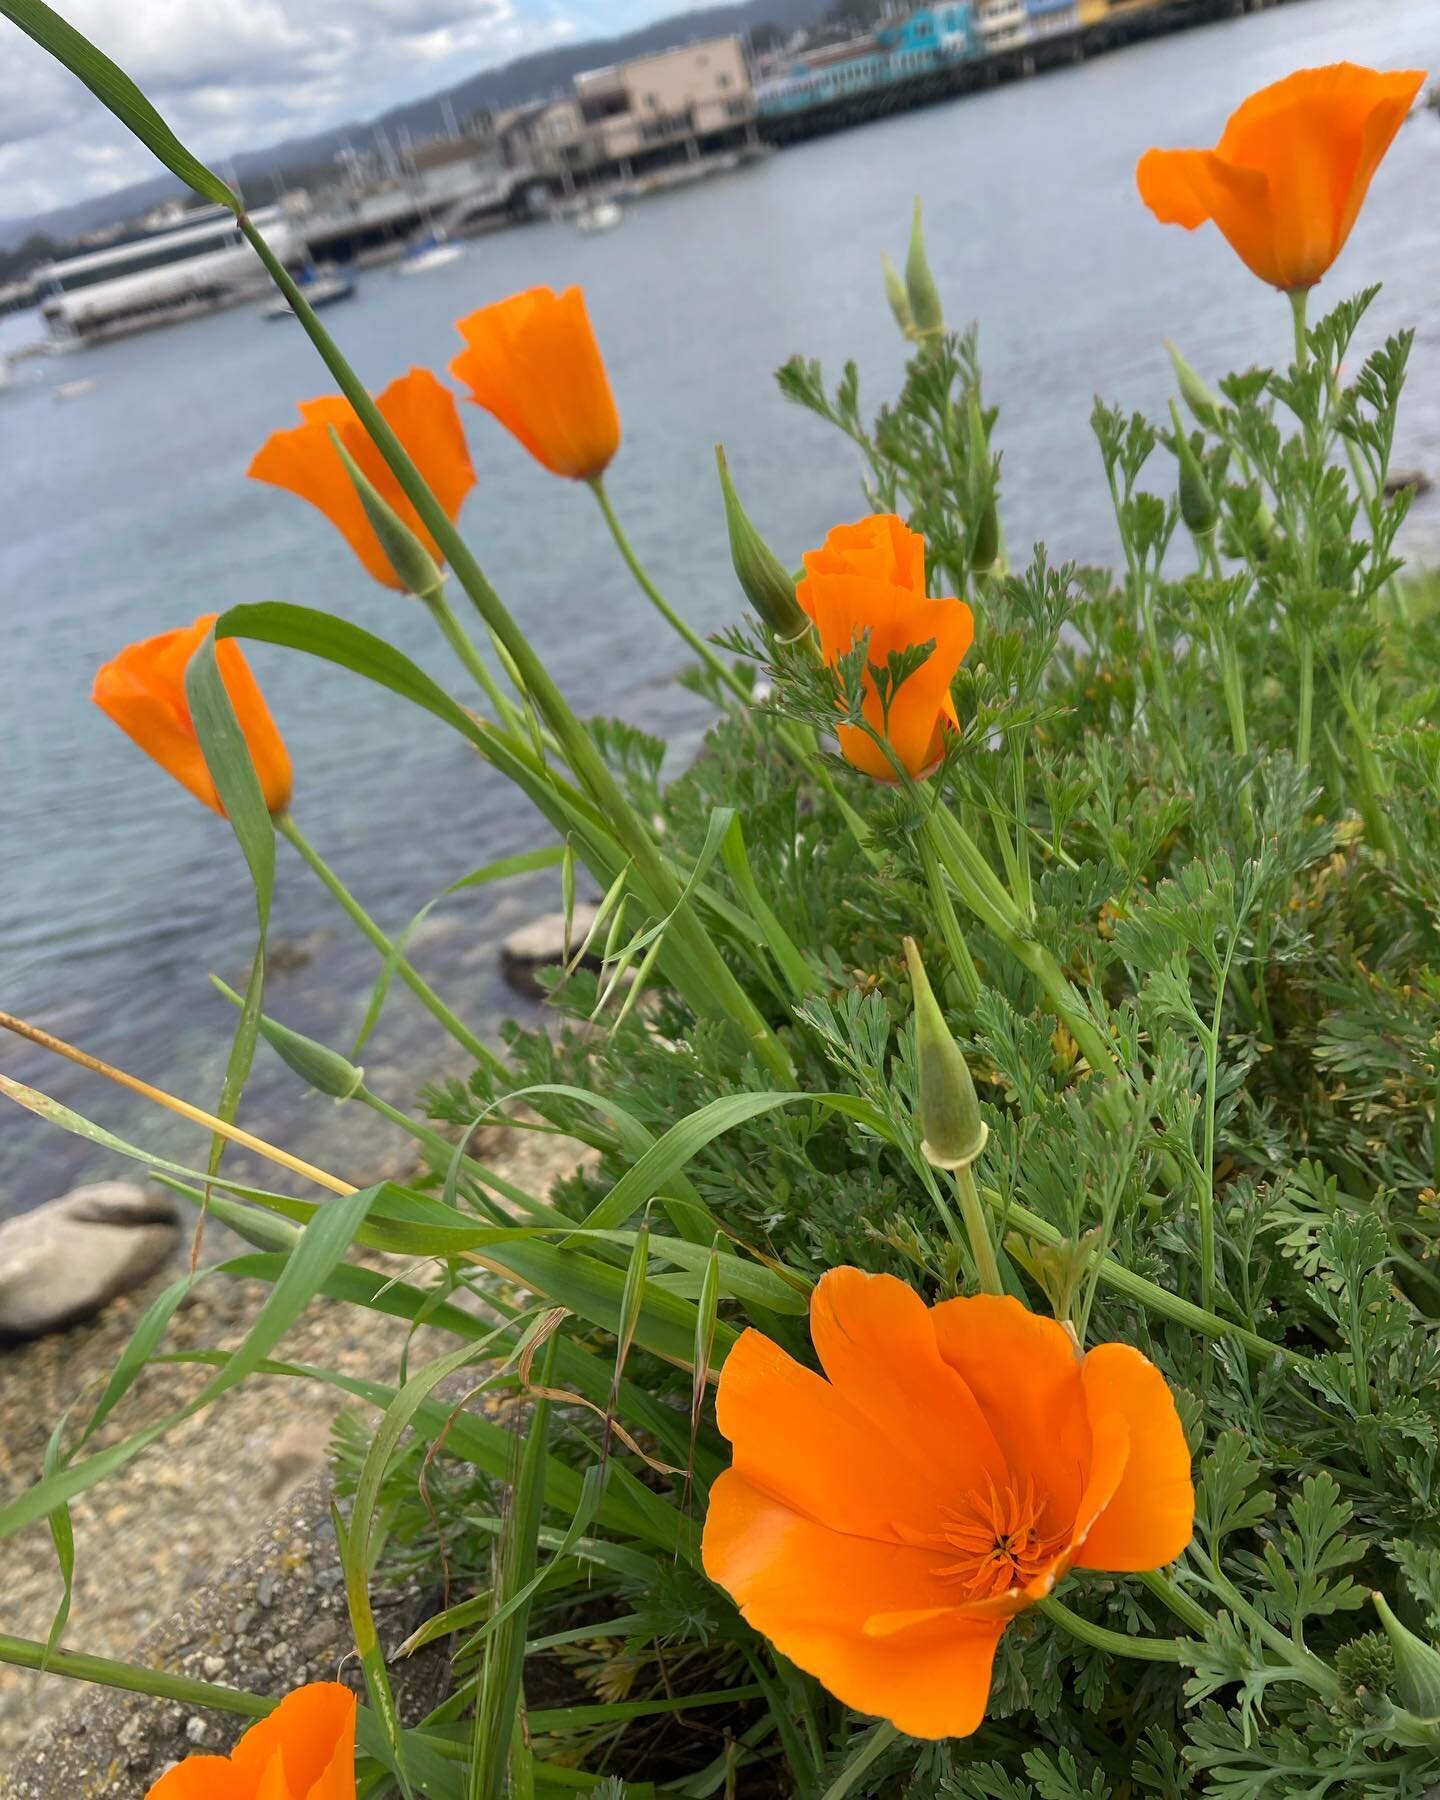 @erro.albatross and I went to Monterey over the weekend before the atmospheric river hit. I&rsquo;m dreading summer, but for now I will say all the green and all the flowers are really beautiful. California Poppies are some of my favorites